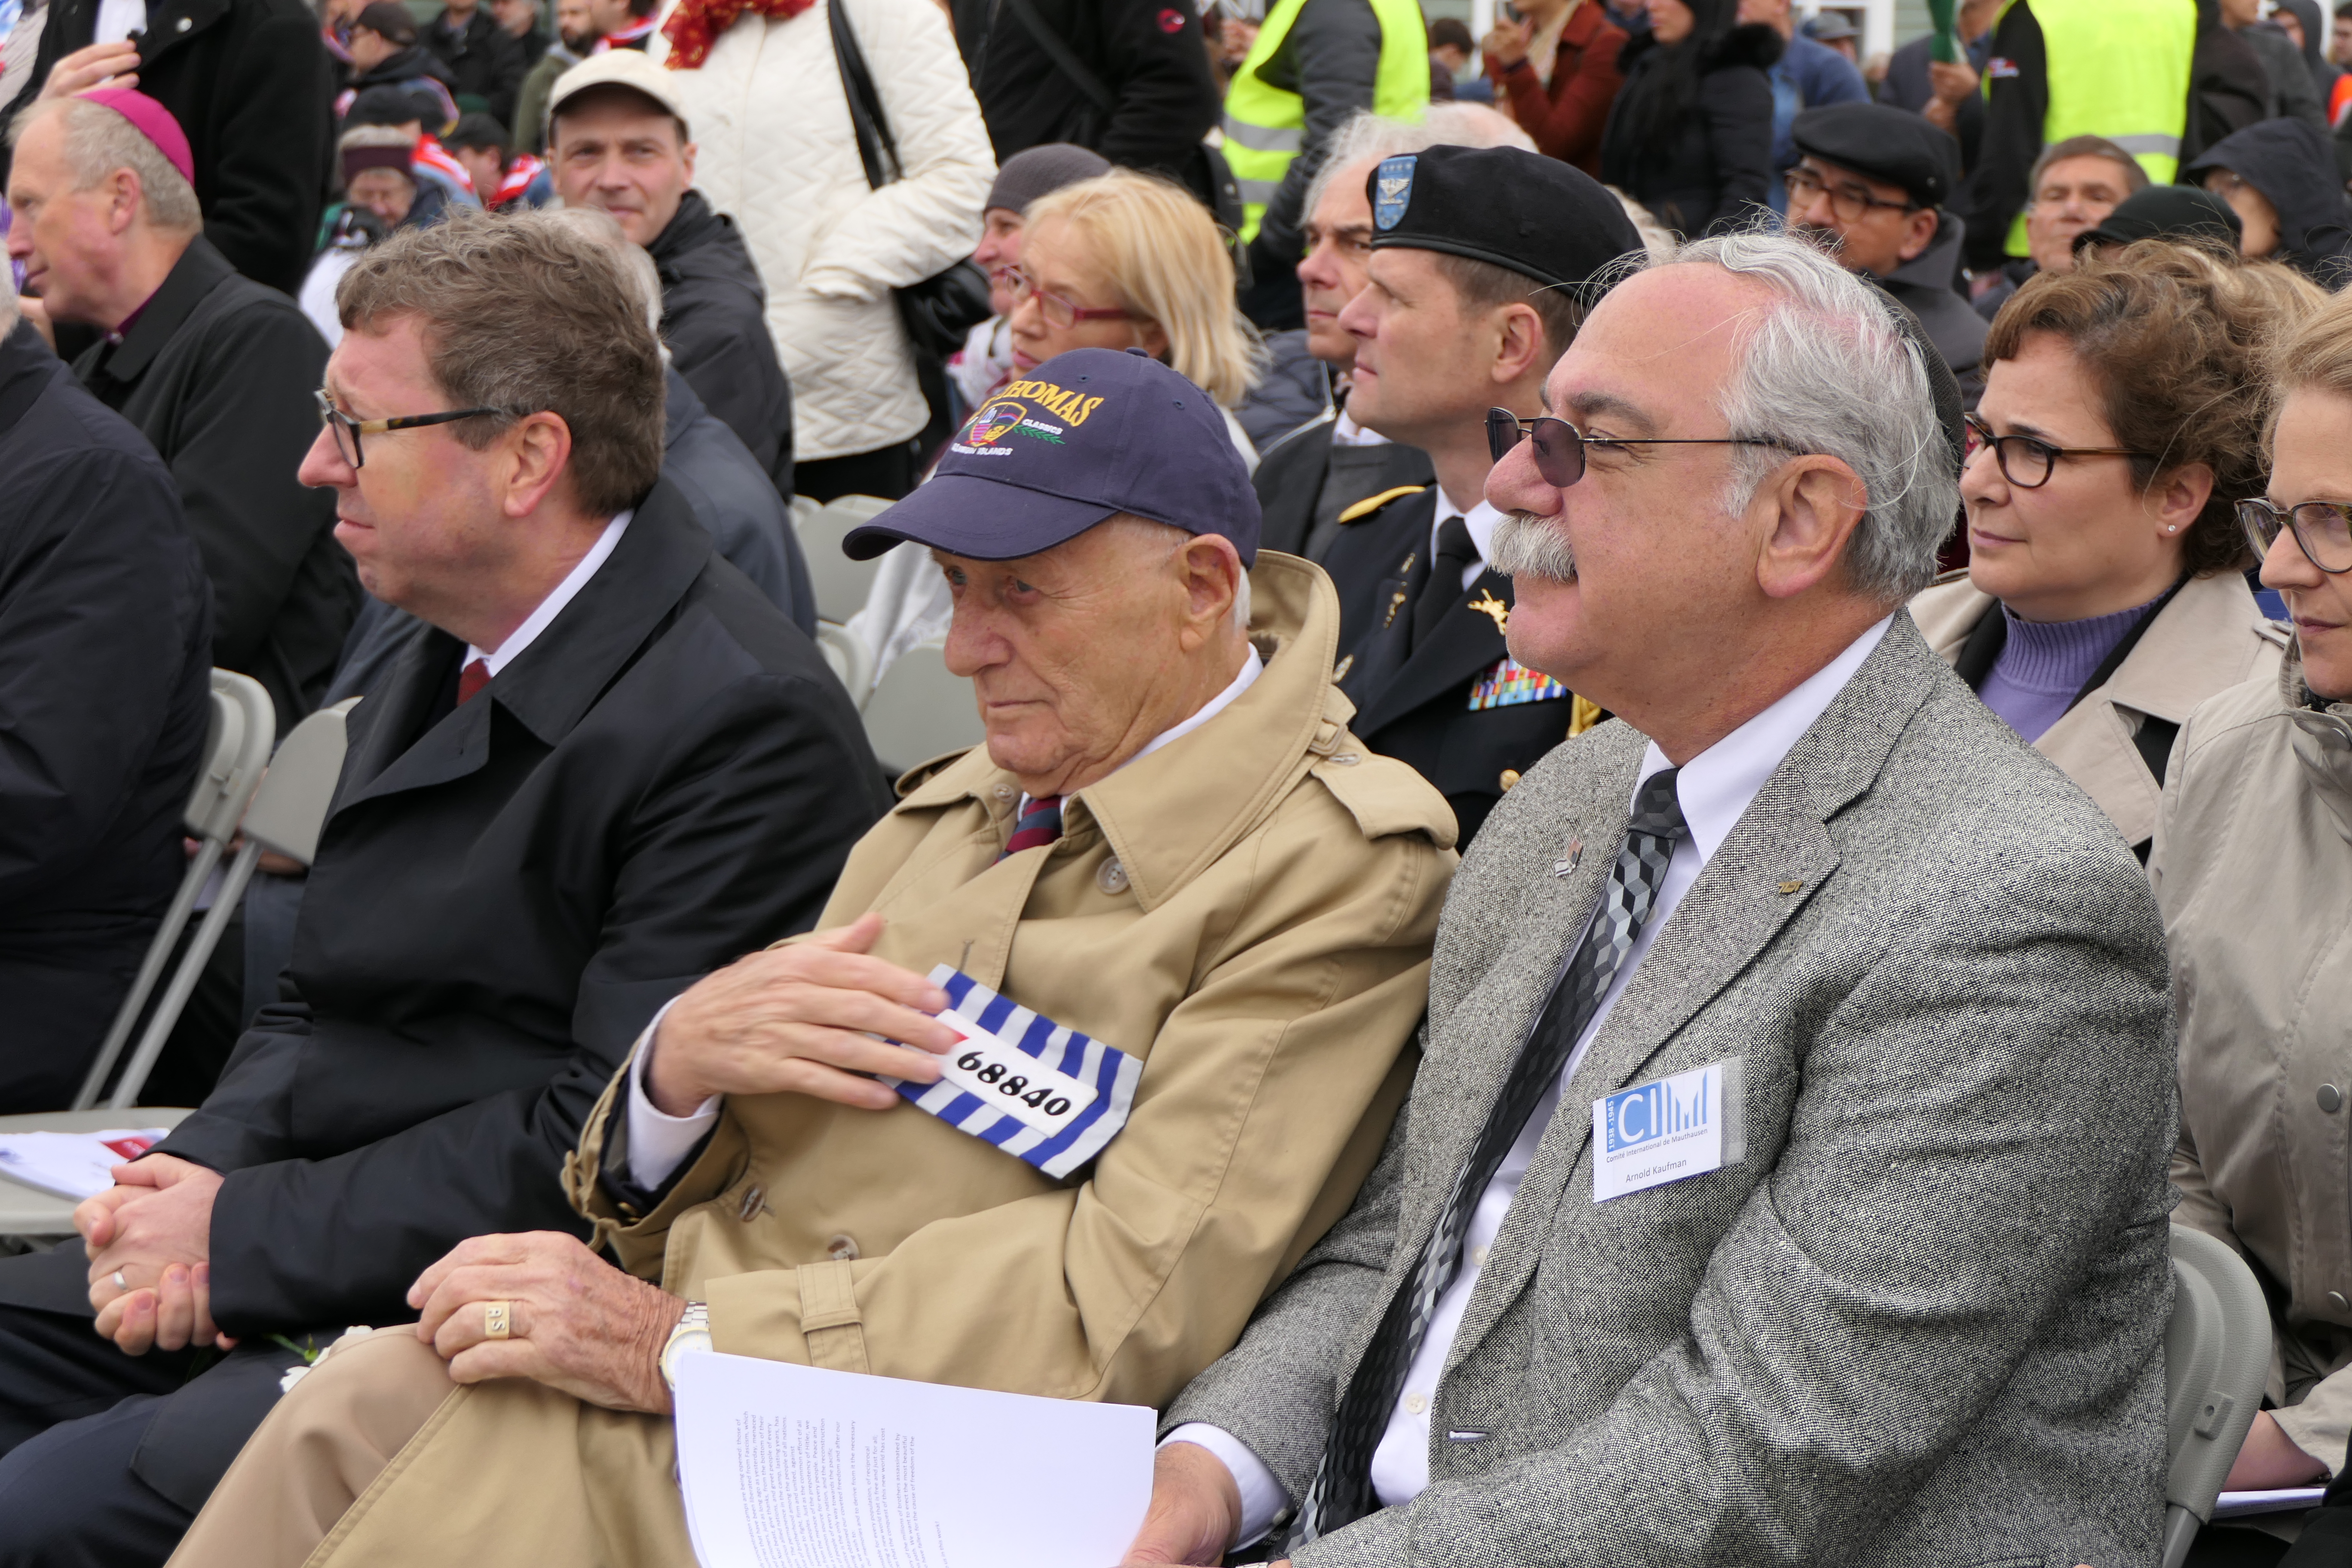 Members of audience at commemoration event